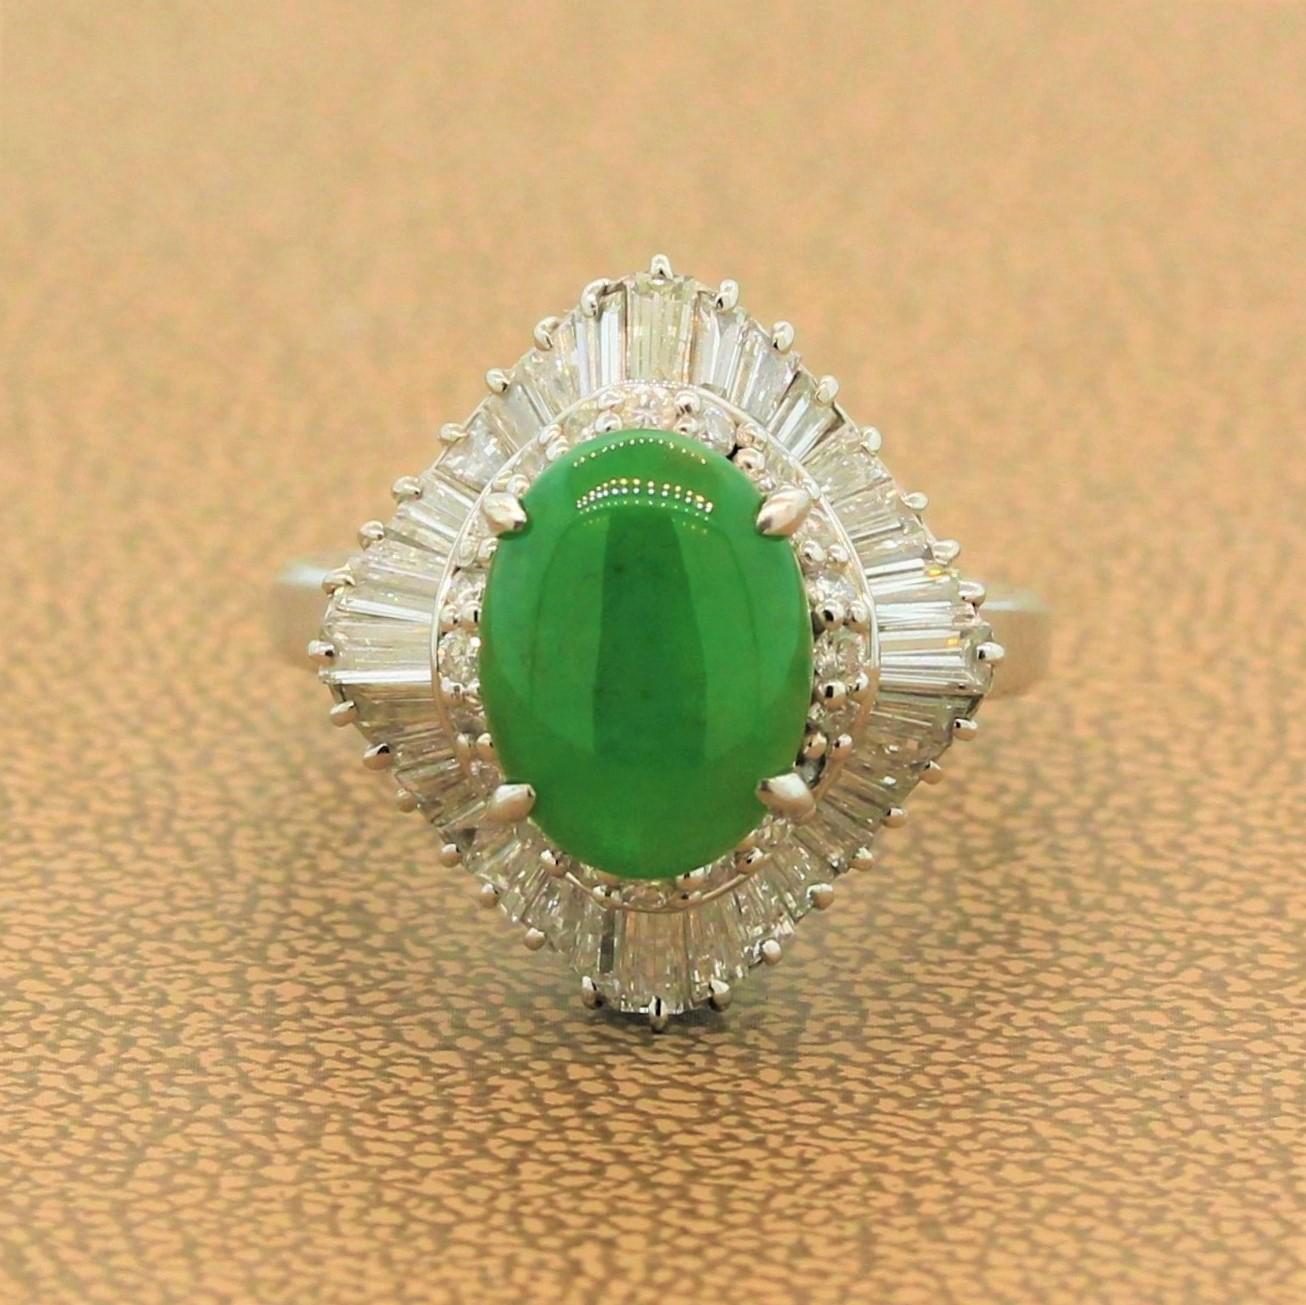 A stunning platinum ring featuring a 3.24 carat green jade. The oval cabochon jade is haloed by a ballerina setting of 1.77 carats of round cut and baguette cut diamonds in a hand fabricated platinum setting.

Ring Size 7.25 (Sizable)
